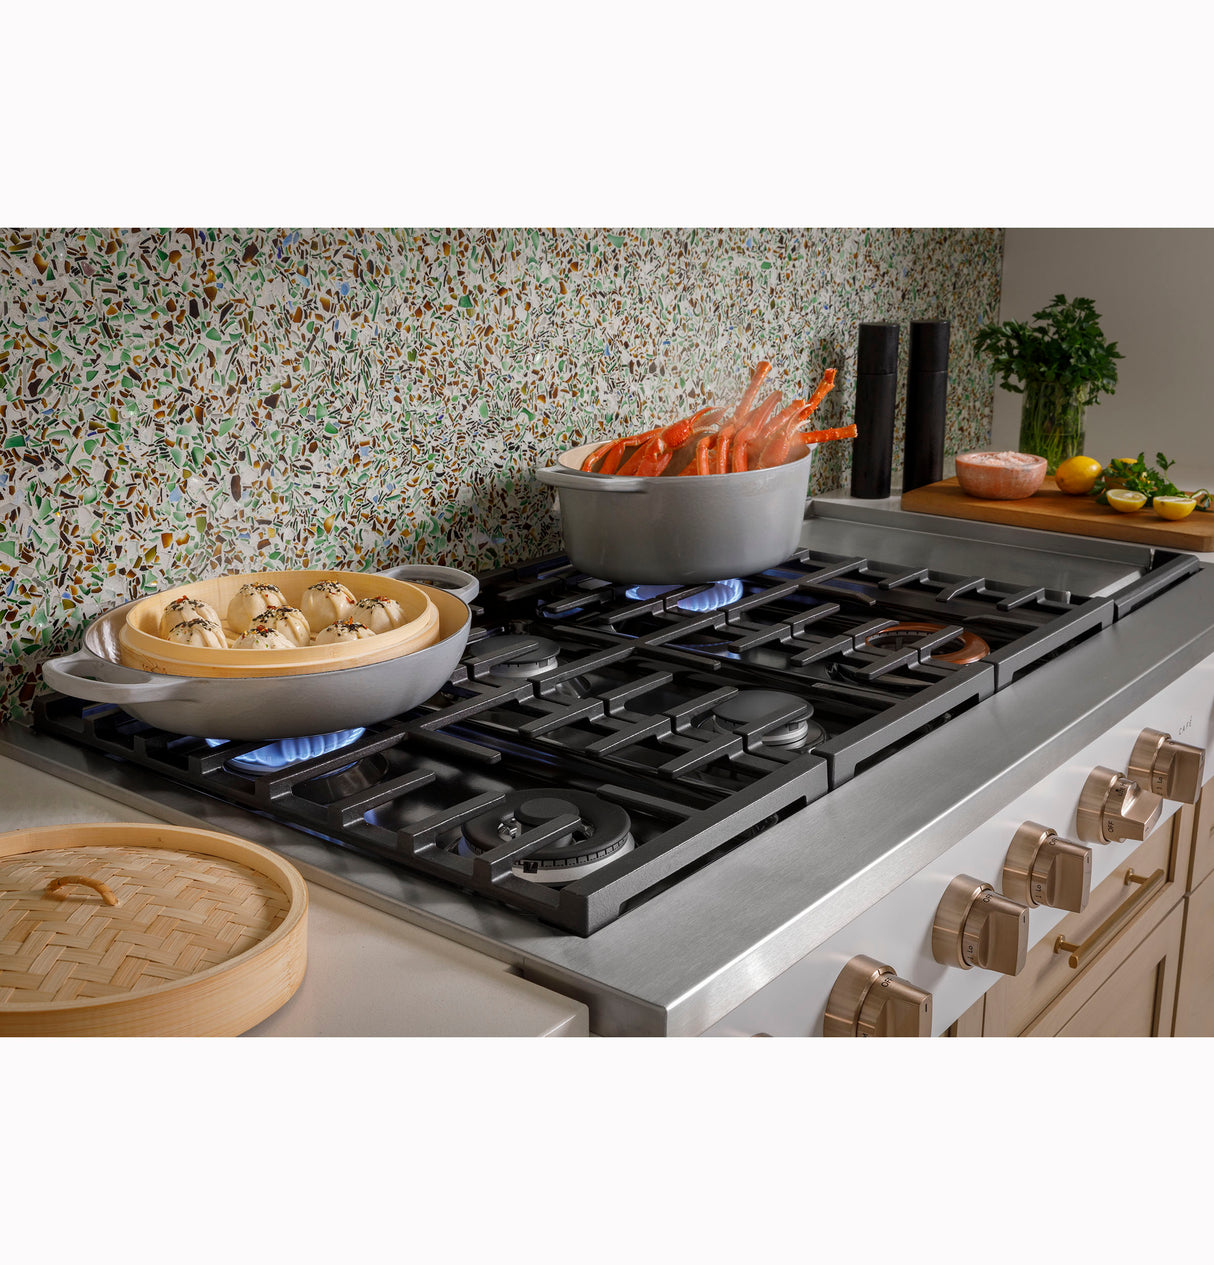 Caf(eback)(TM) 48" Commercial-Style Gas Rangetop with 6 Burners and Integrated Griddle (Natural Gas) - (CGU486P2TS1)